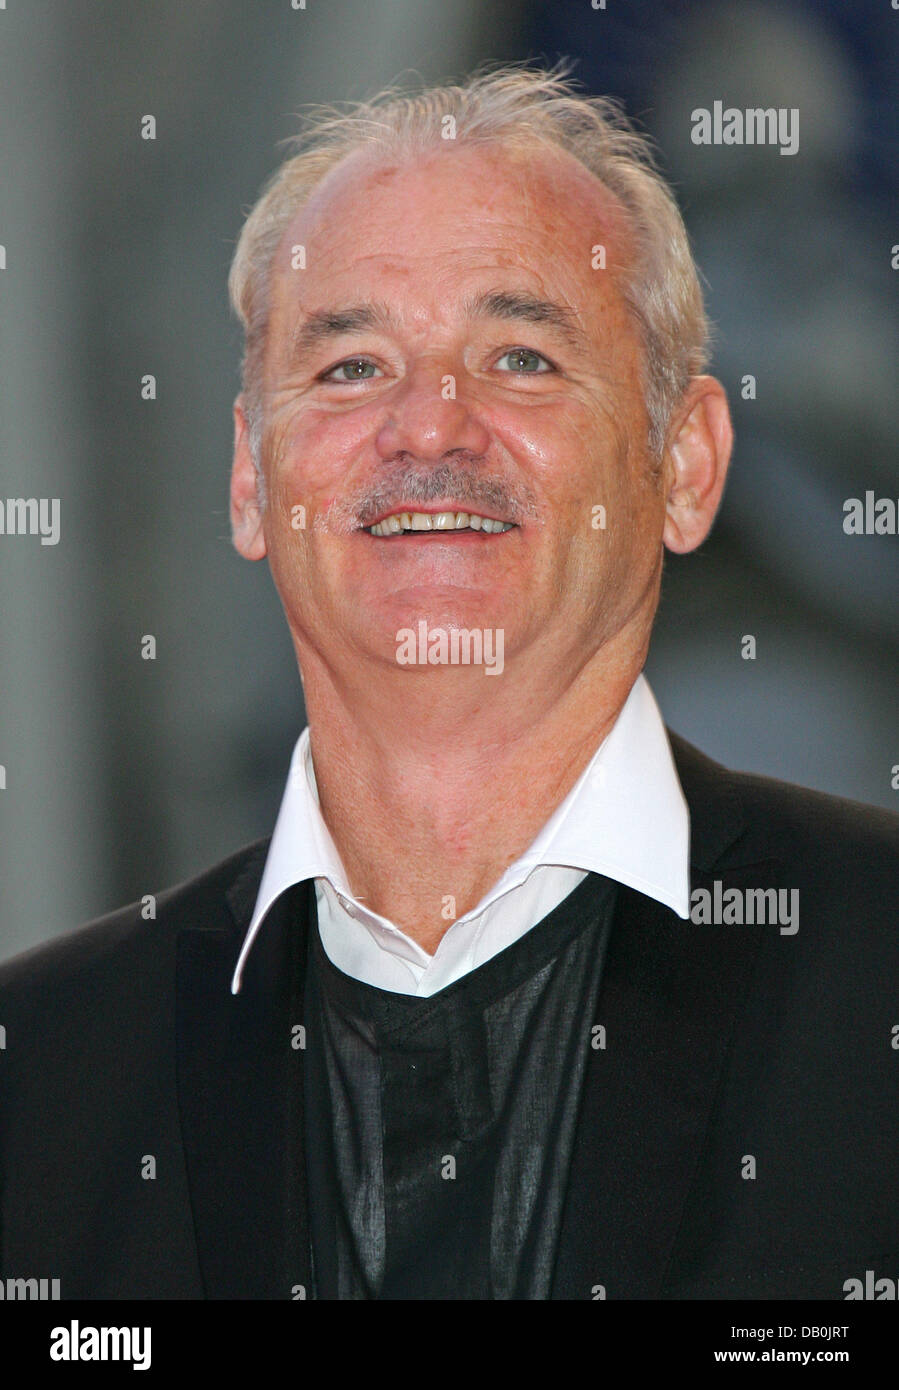 US actor Bill Murray arrives for the premiere of 'The Darjeeling Limited' at the 64th Venice International Film Festival in Venice, Italy, 03 September 2007. Photo: Hubert Boesl Stock Photo